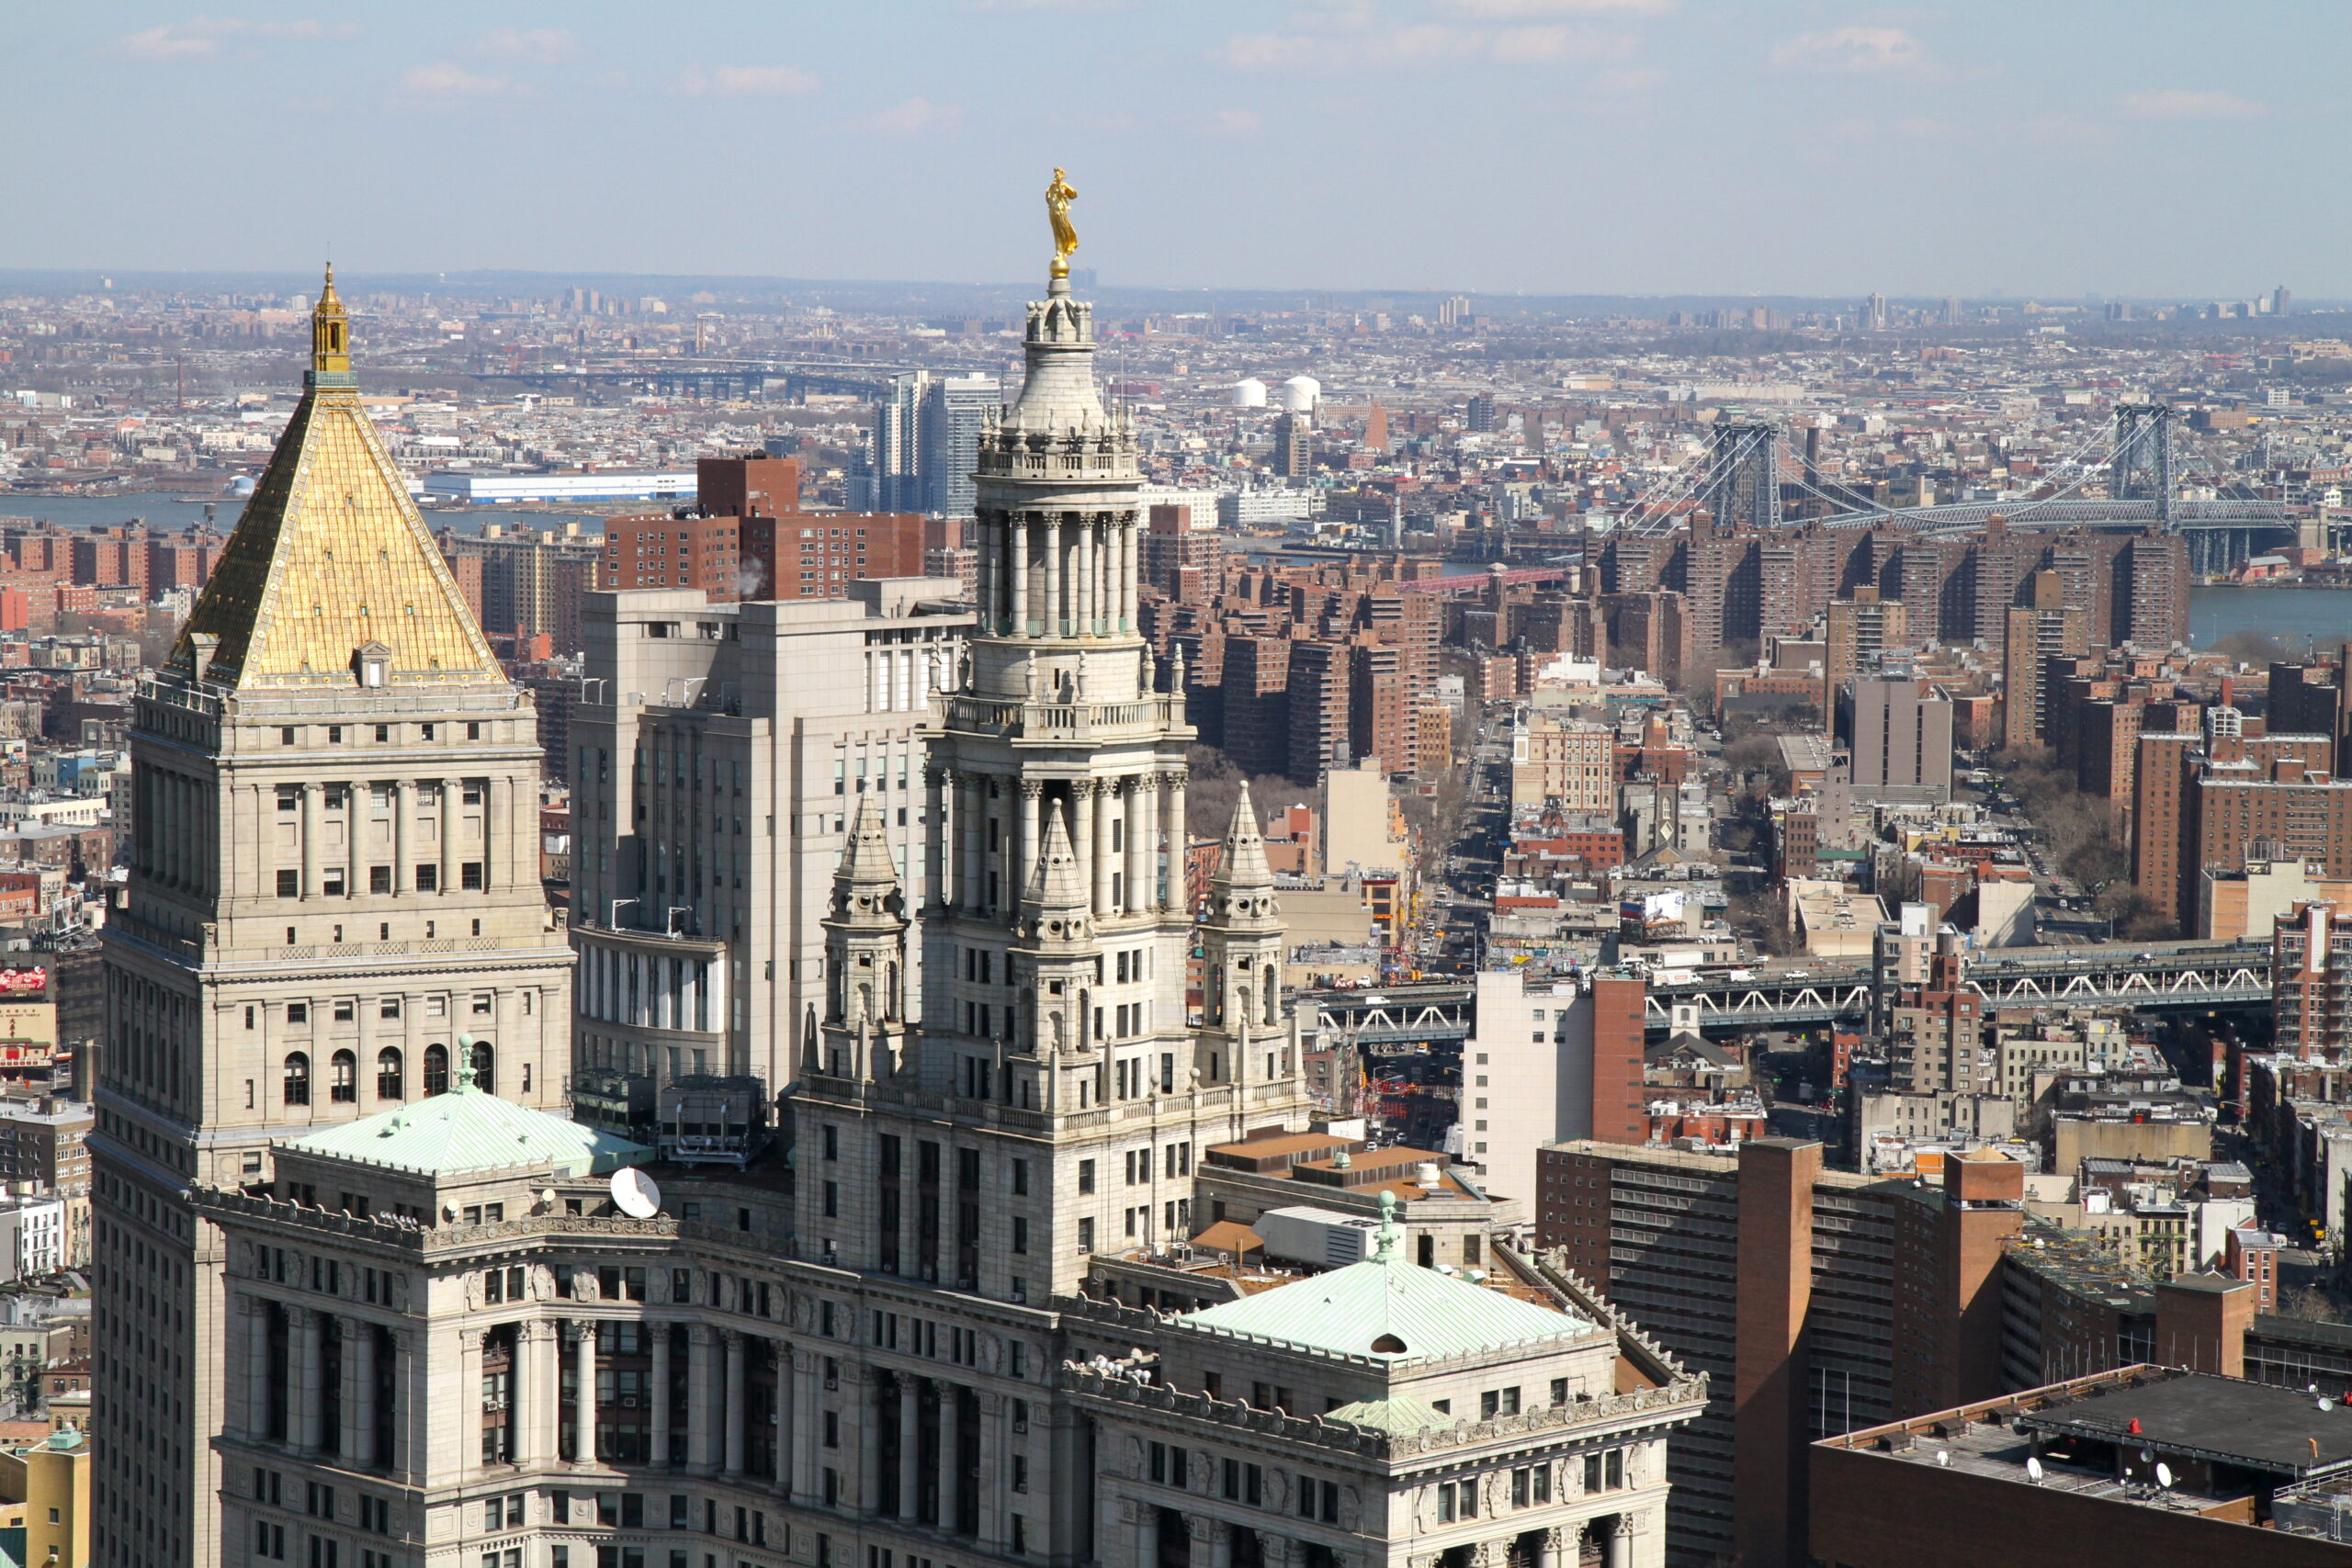 View of the Municipal Building in Manhattan